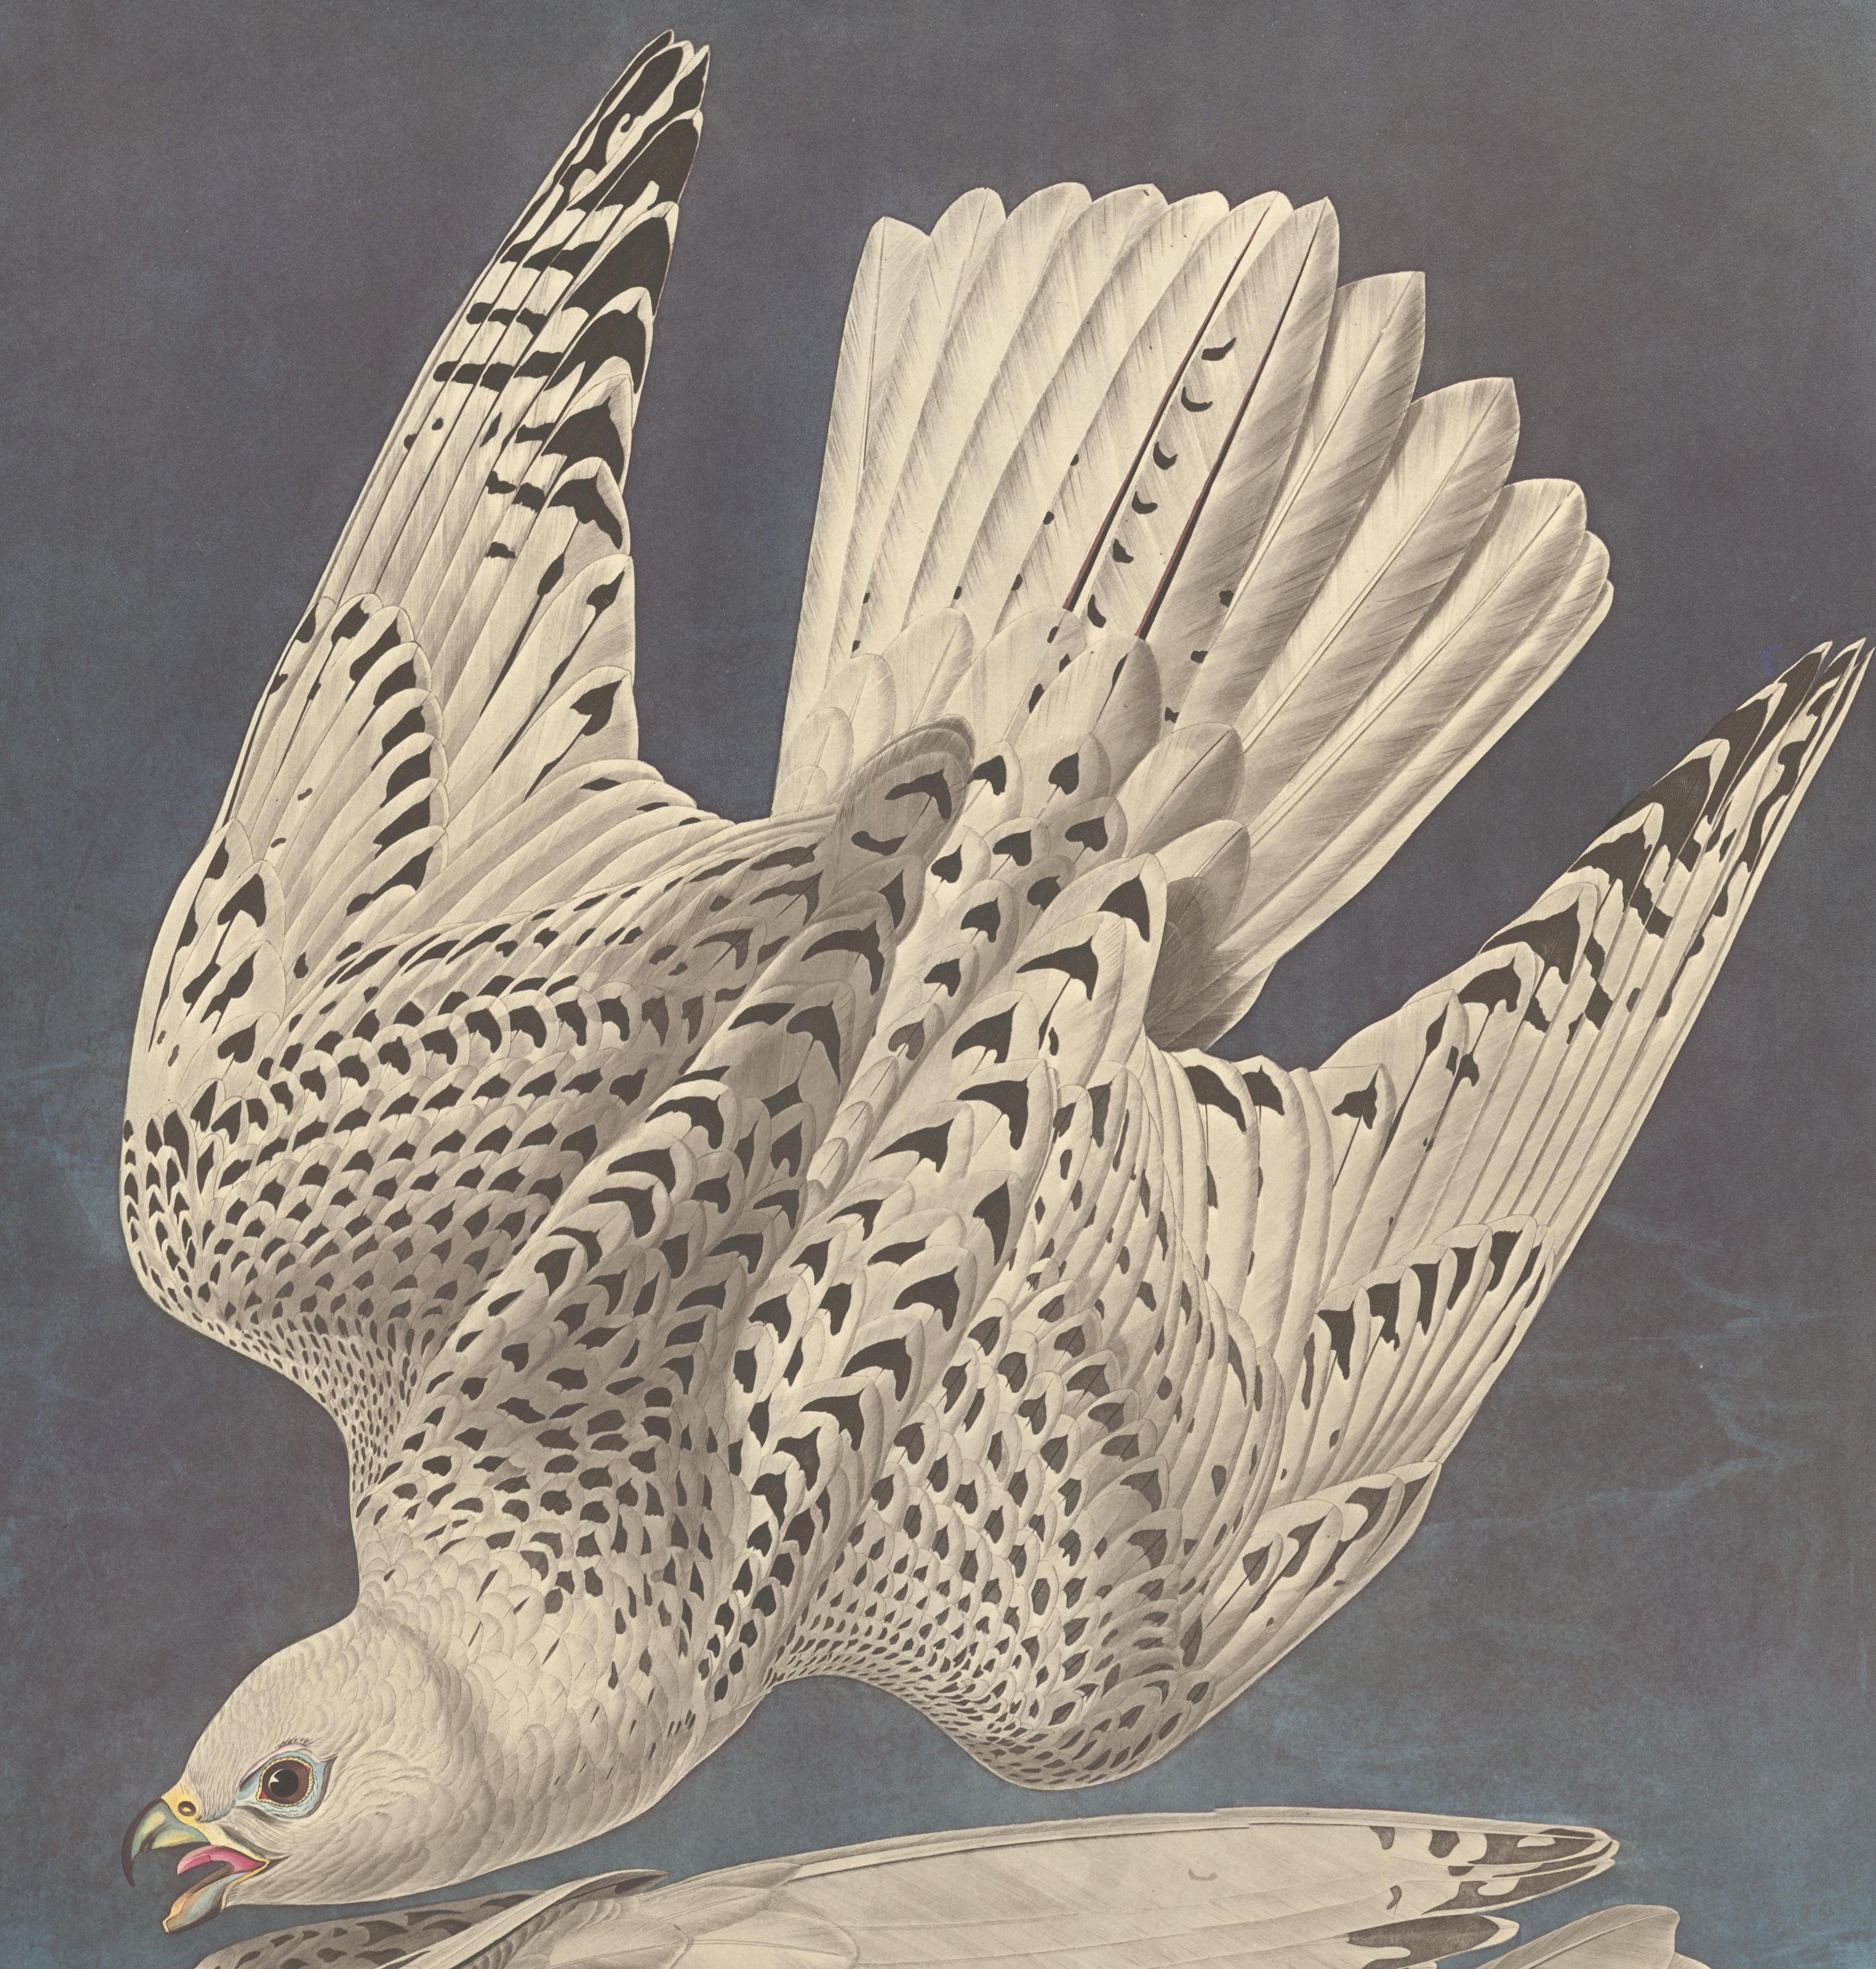 Plate CCCLXVI, Iceland or Gyr Falcon, posthumous reproduction after John James Audubon from The Birds of America, the Amsterdam Edition, printed in Amsterdam, 1971-73. Original multicolored photo-offset print. 